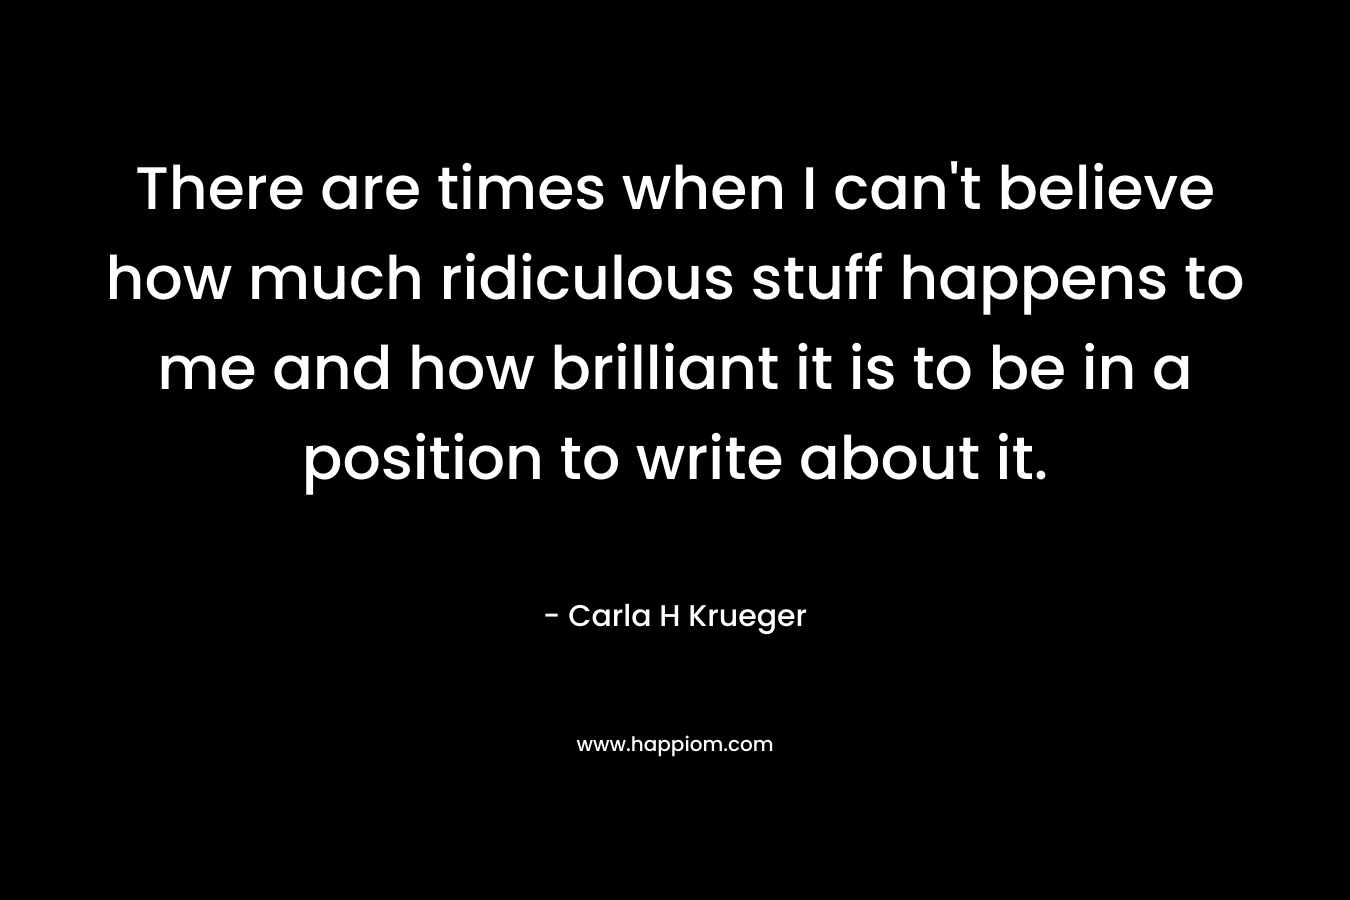 There are times when I can’t believe how much ridiculous stuff happens to me and how brilliant it is to be in a position to write about it. – Carla H Krueger